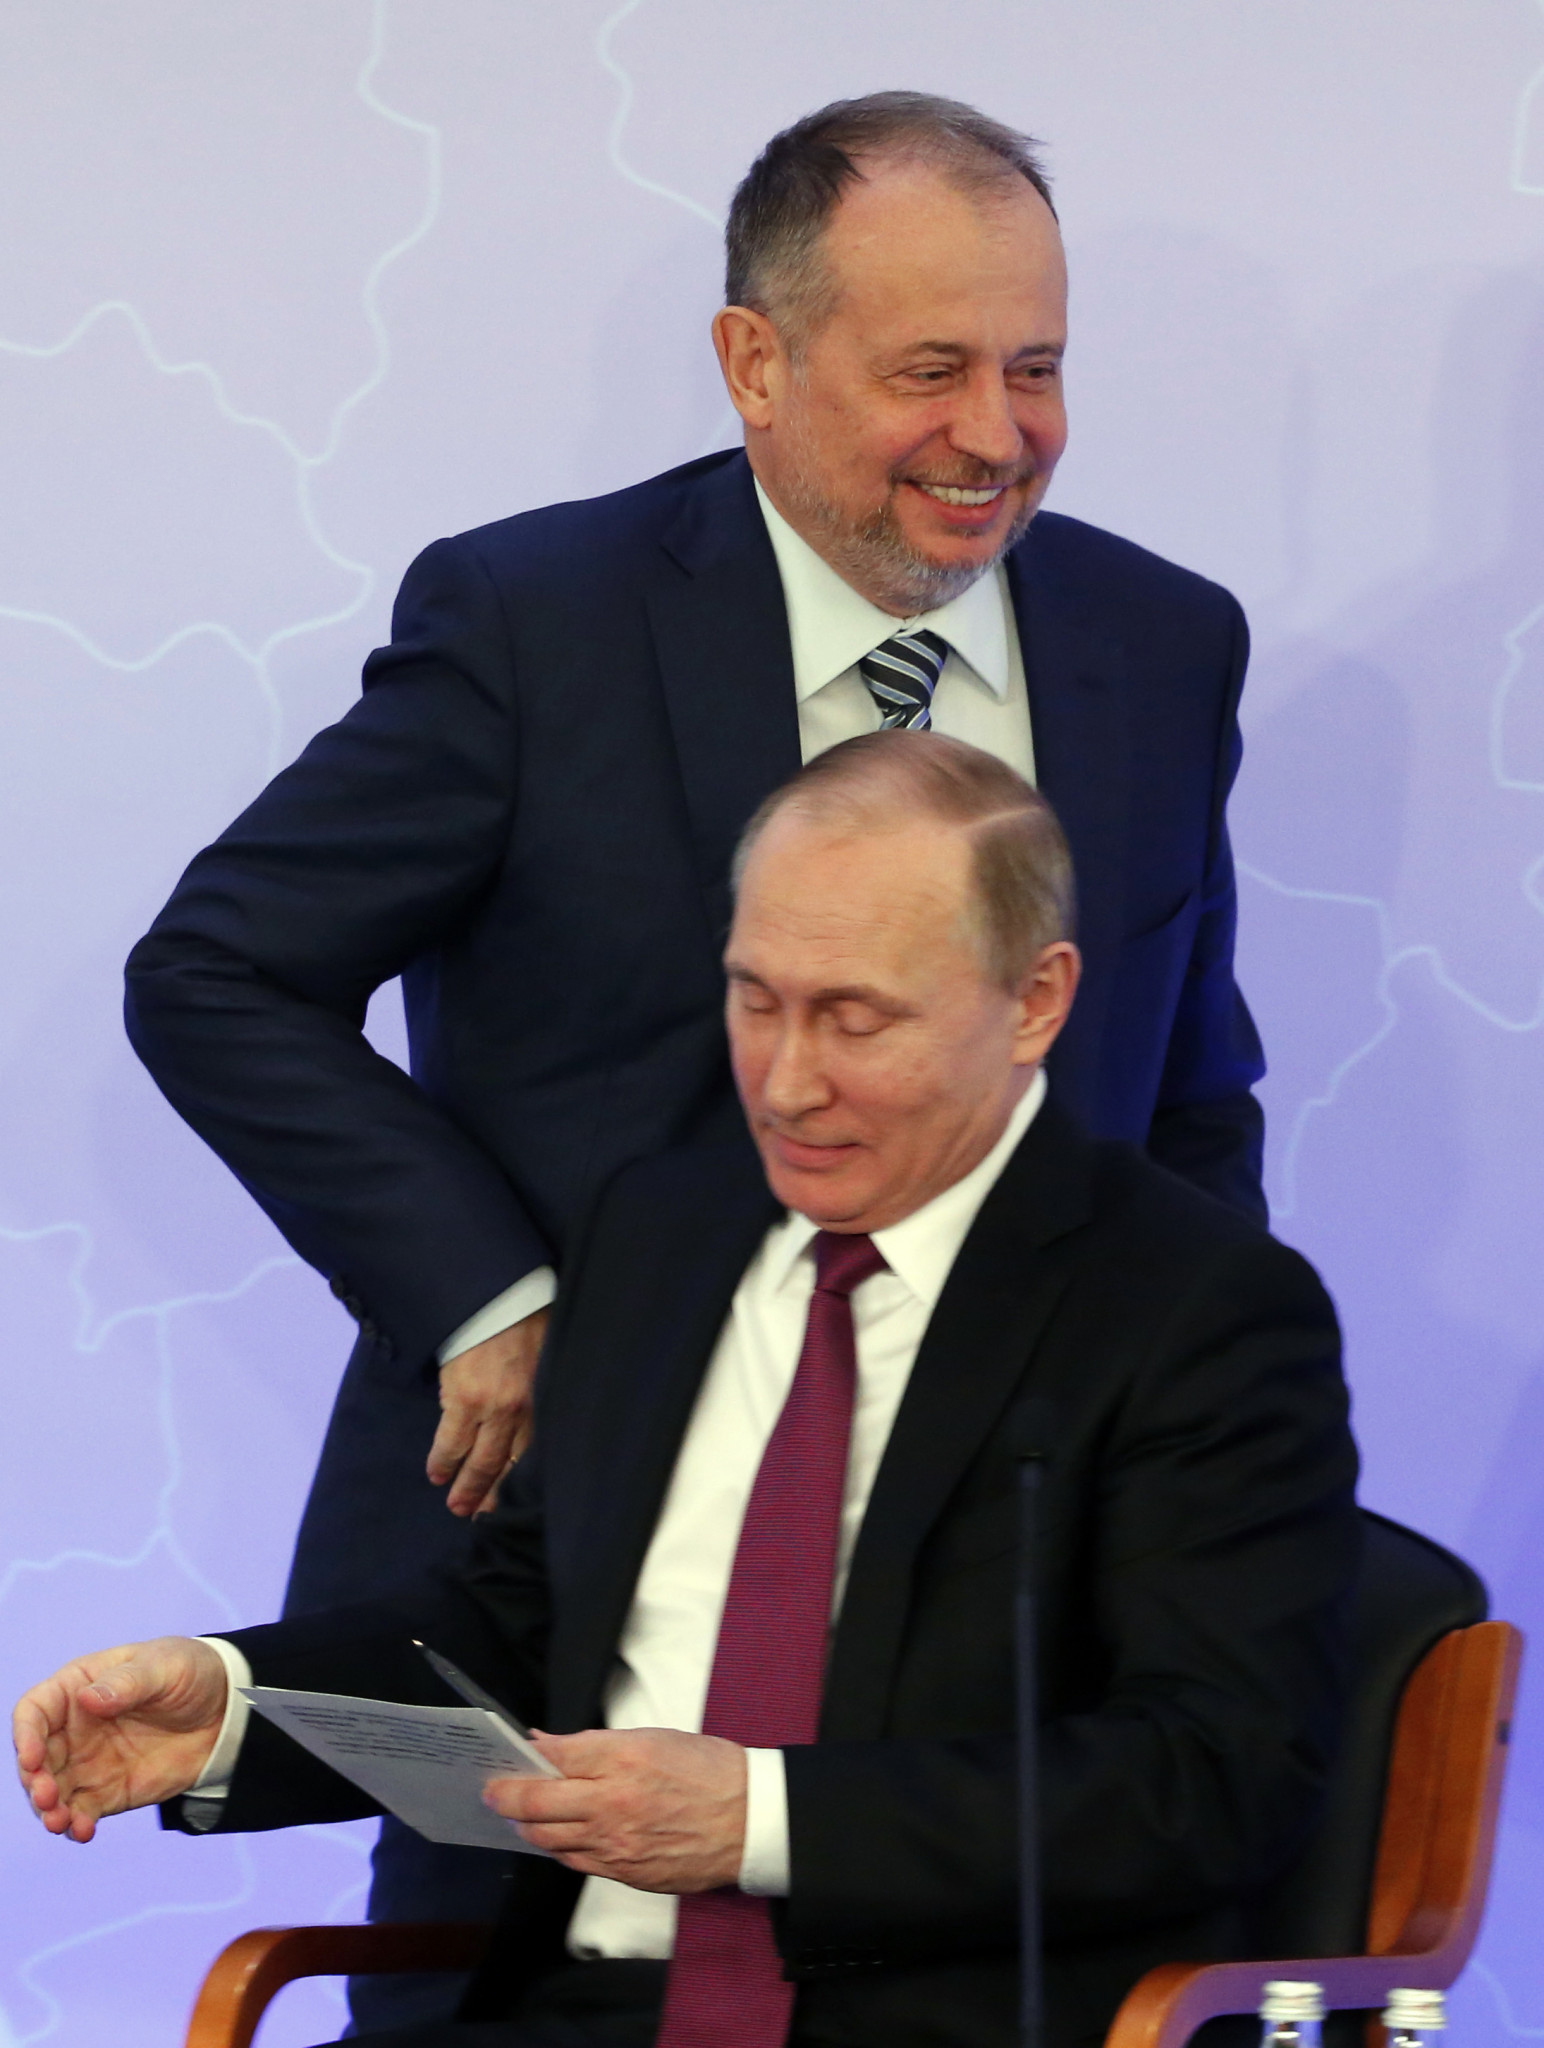 Luciano Rossi is running against Russia's Vladimir Lisin, pictured here with Vladimir Putin, for the right to succeed Olegario Vázquez Raña as ISSF President ©Getty Images